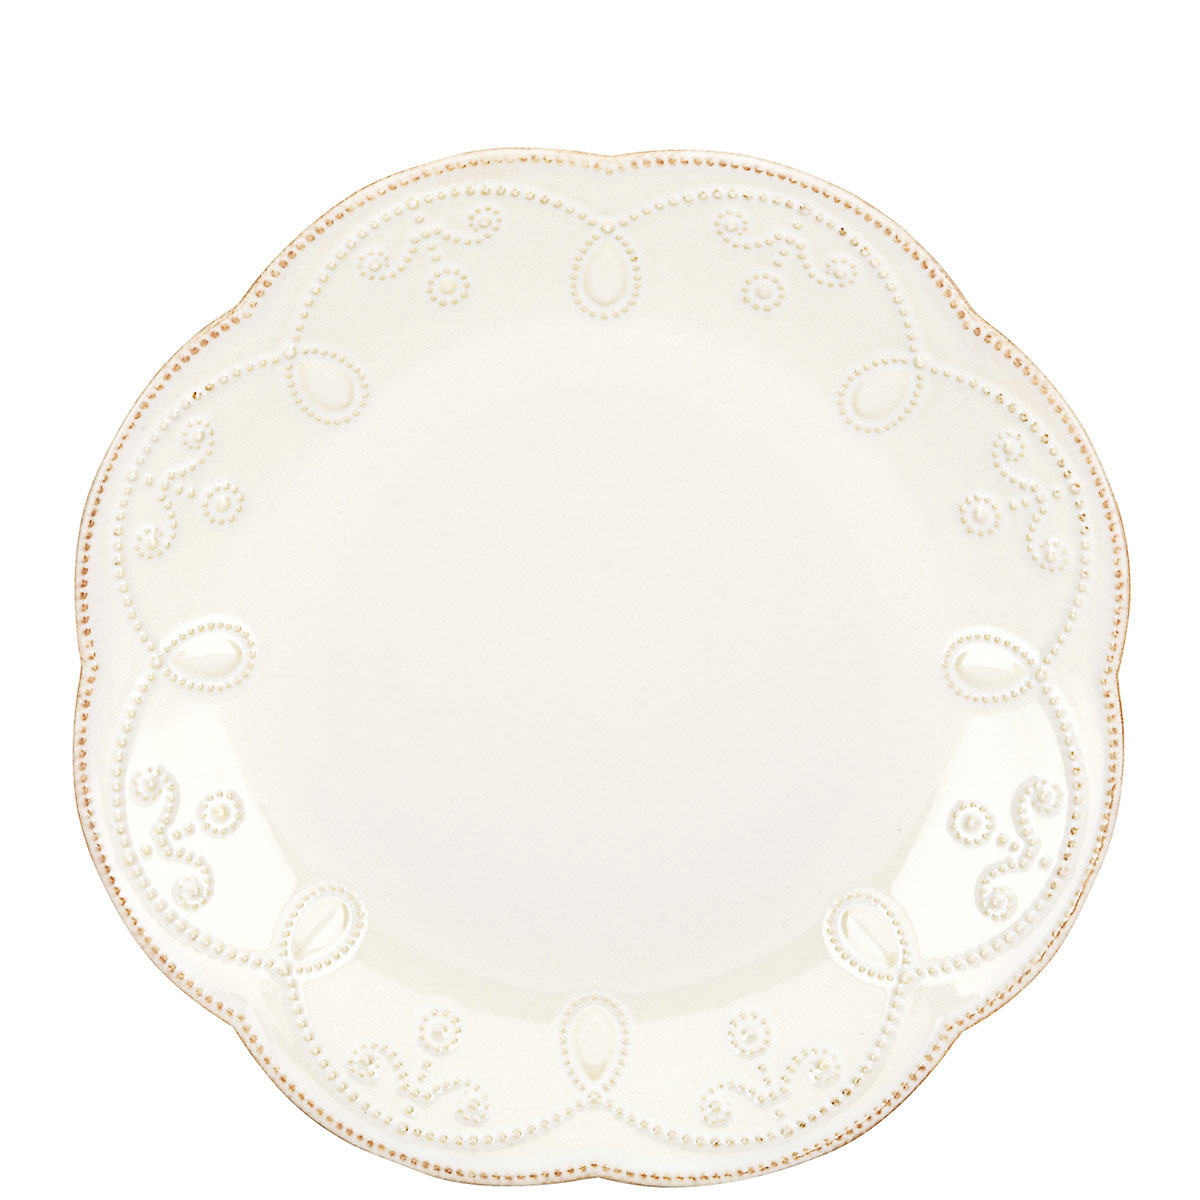 Lenox French Perle White Dinnerware Accent Plate, Single